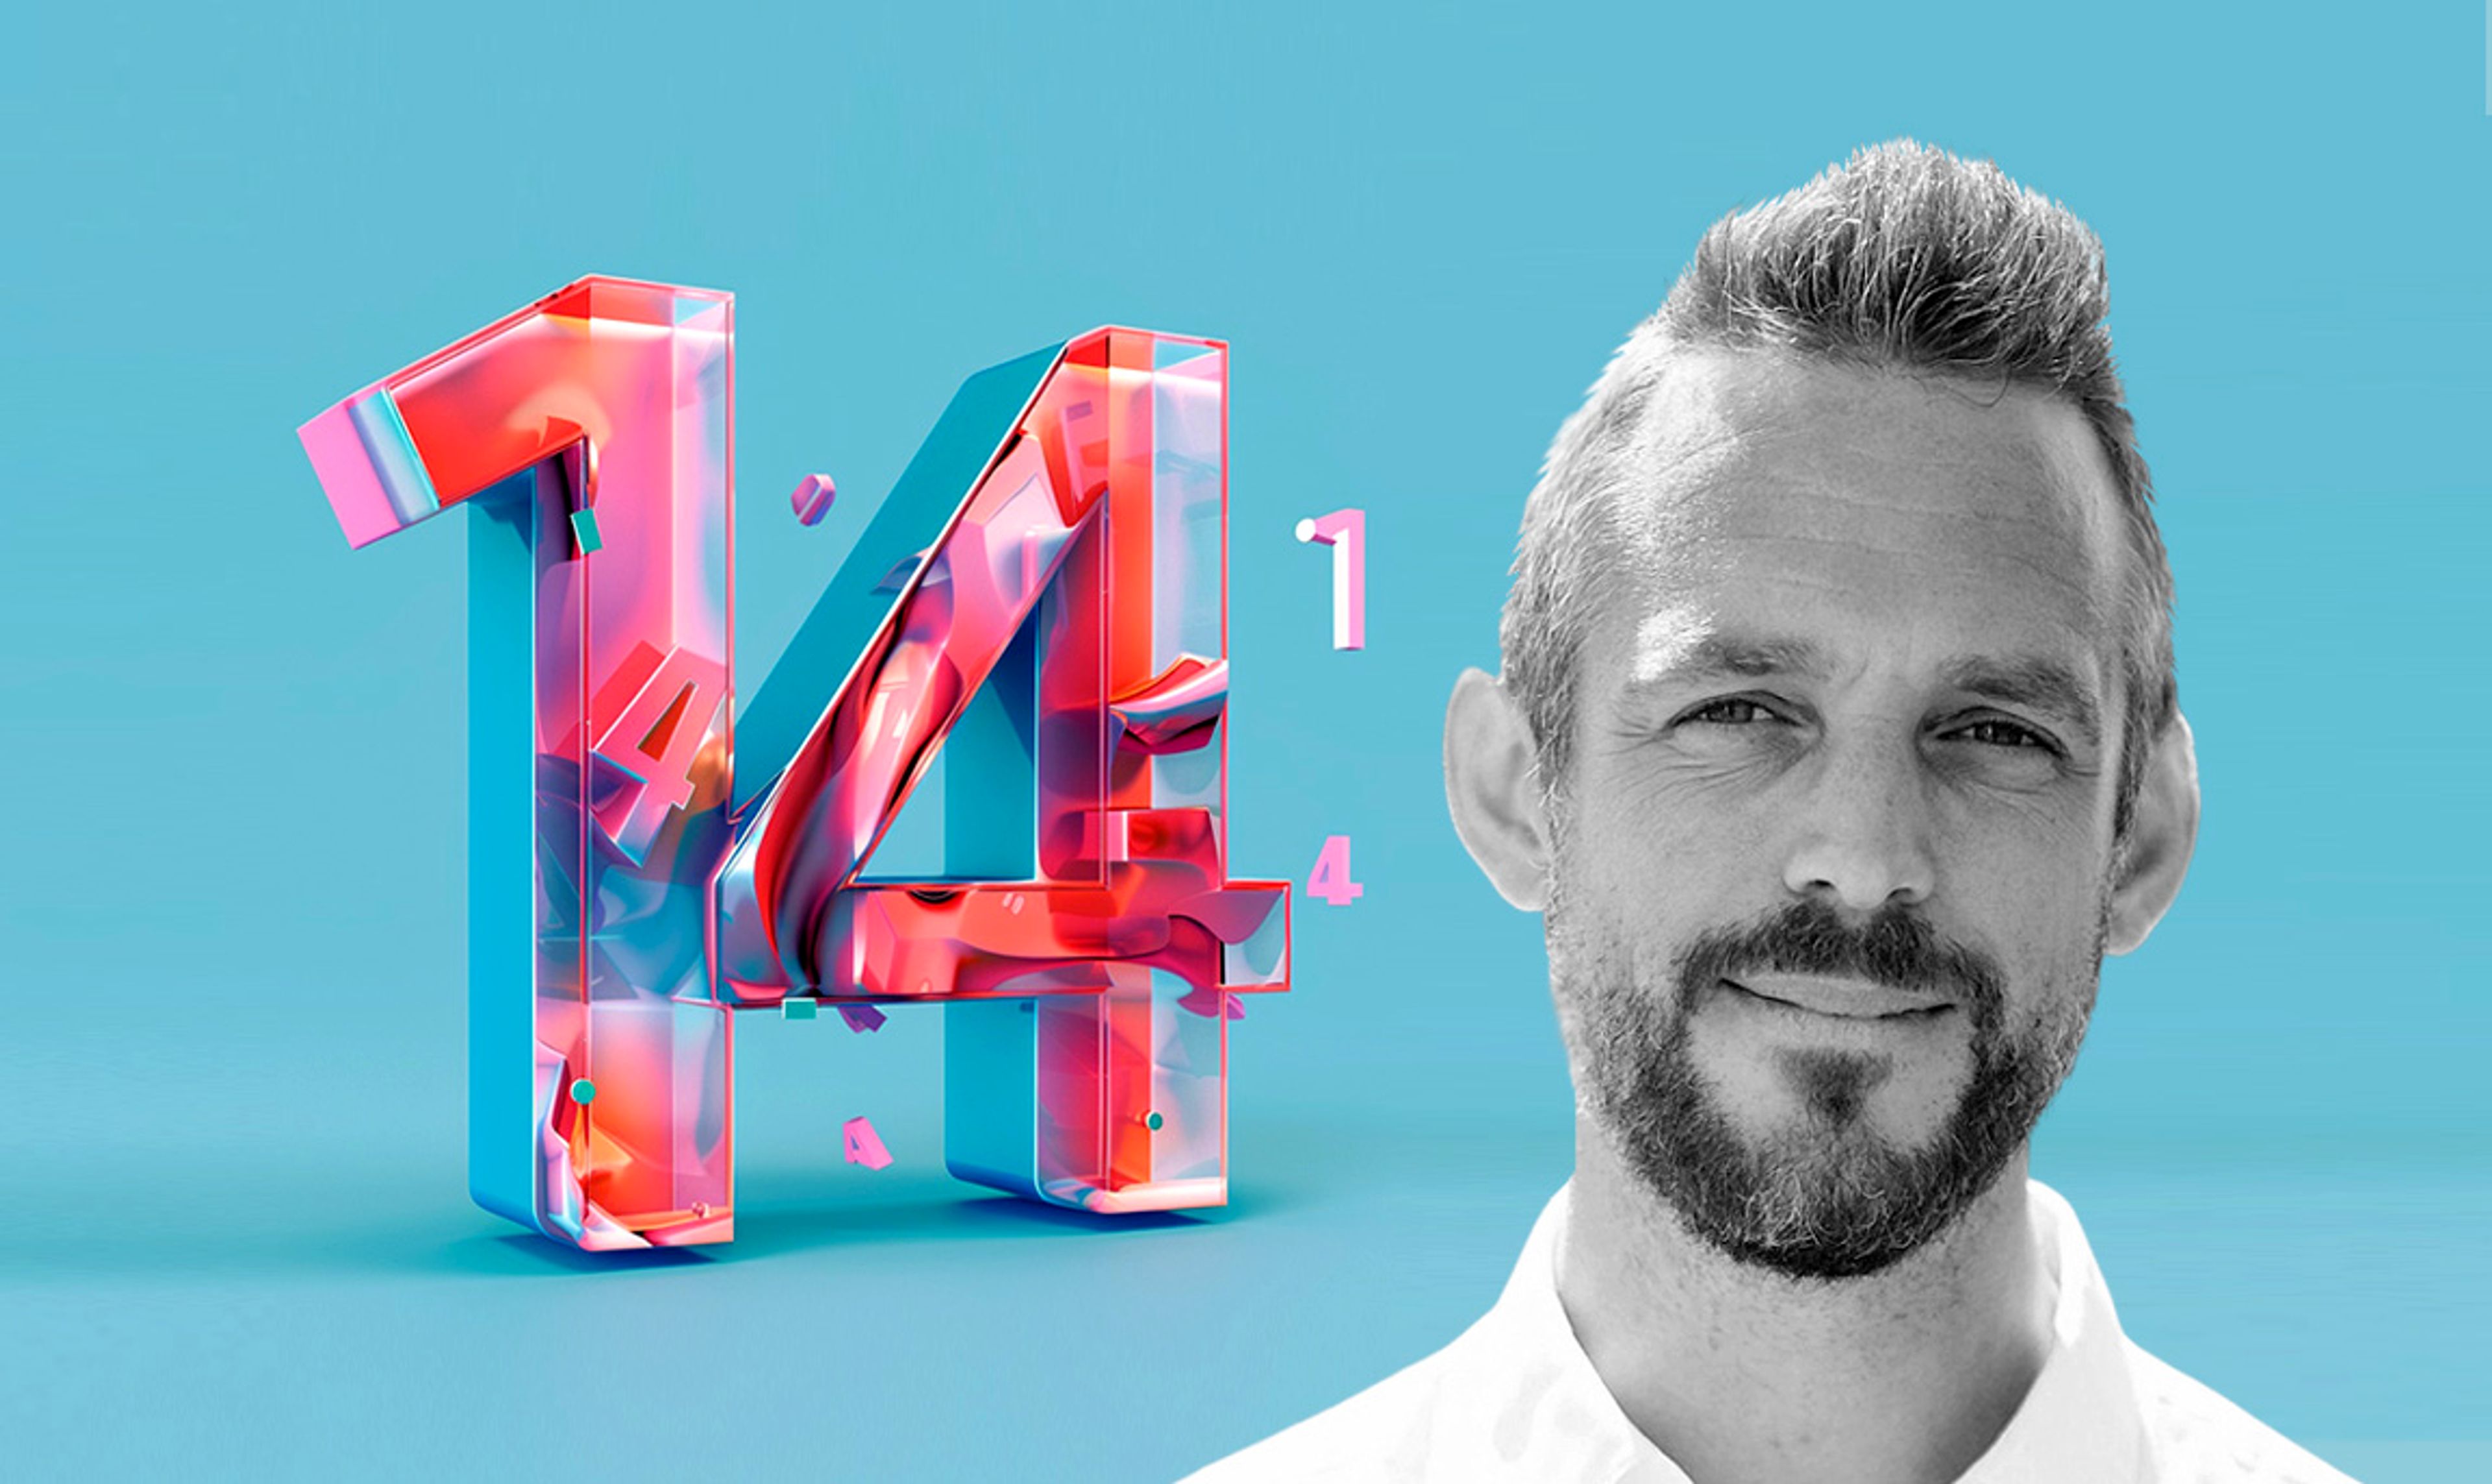 Graphical image of the number "14" next to a headshot of Filip, CTO of Umbraco